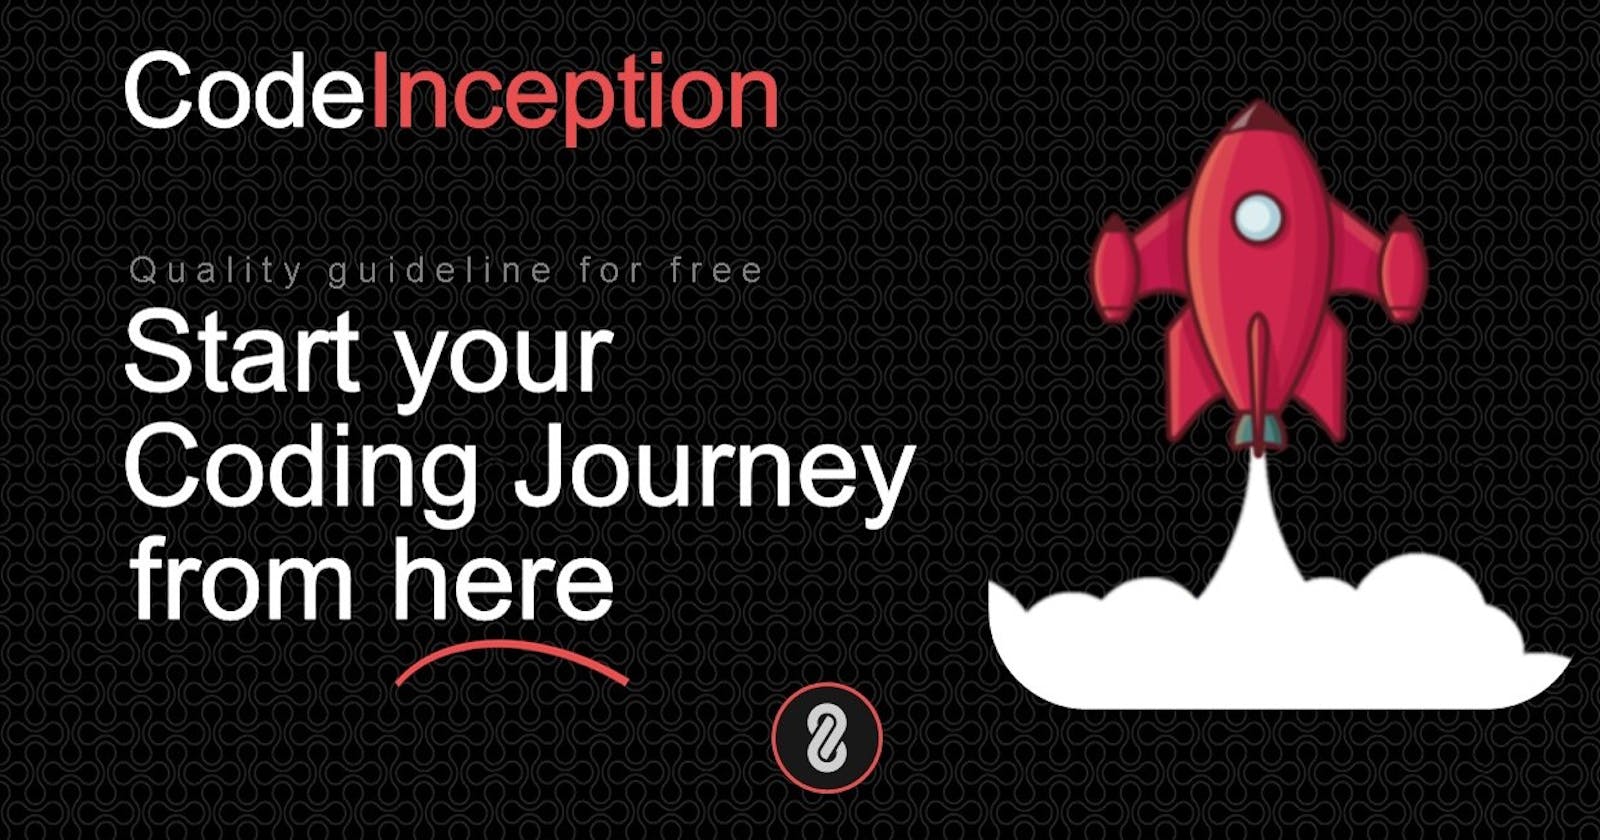 Get Started your coding journey with the CodeInception